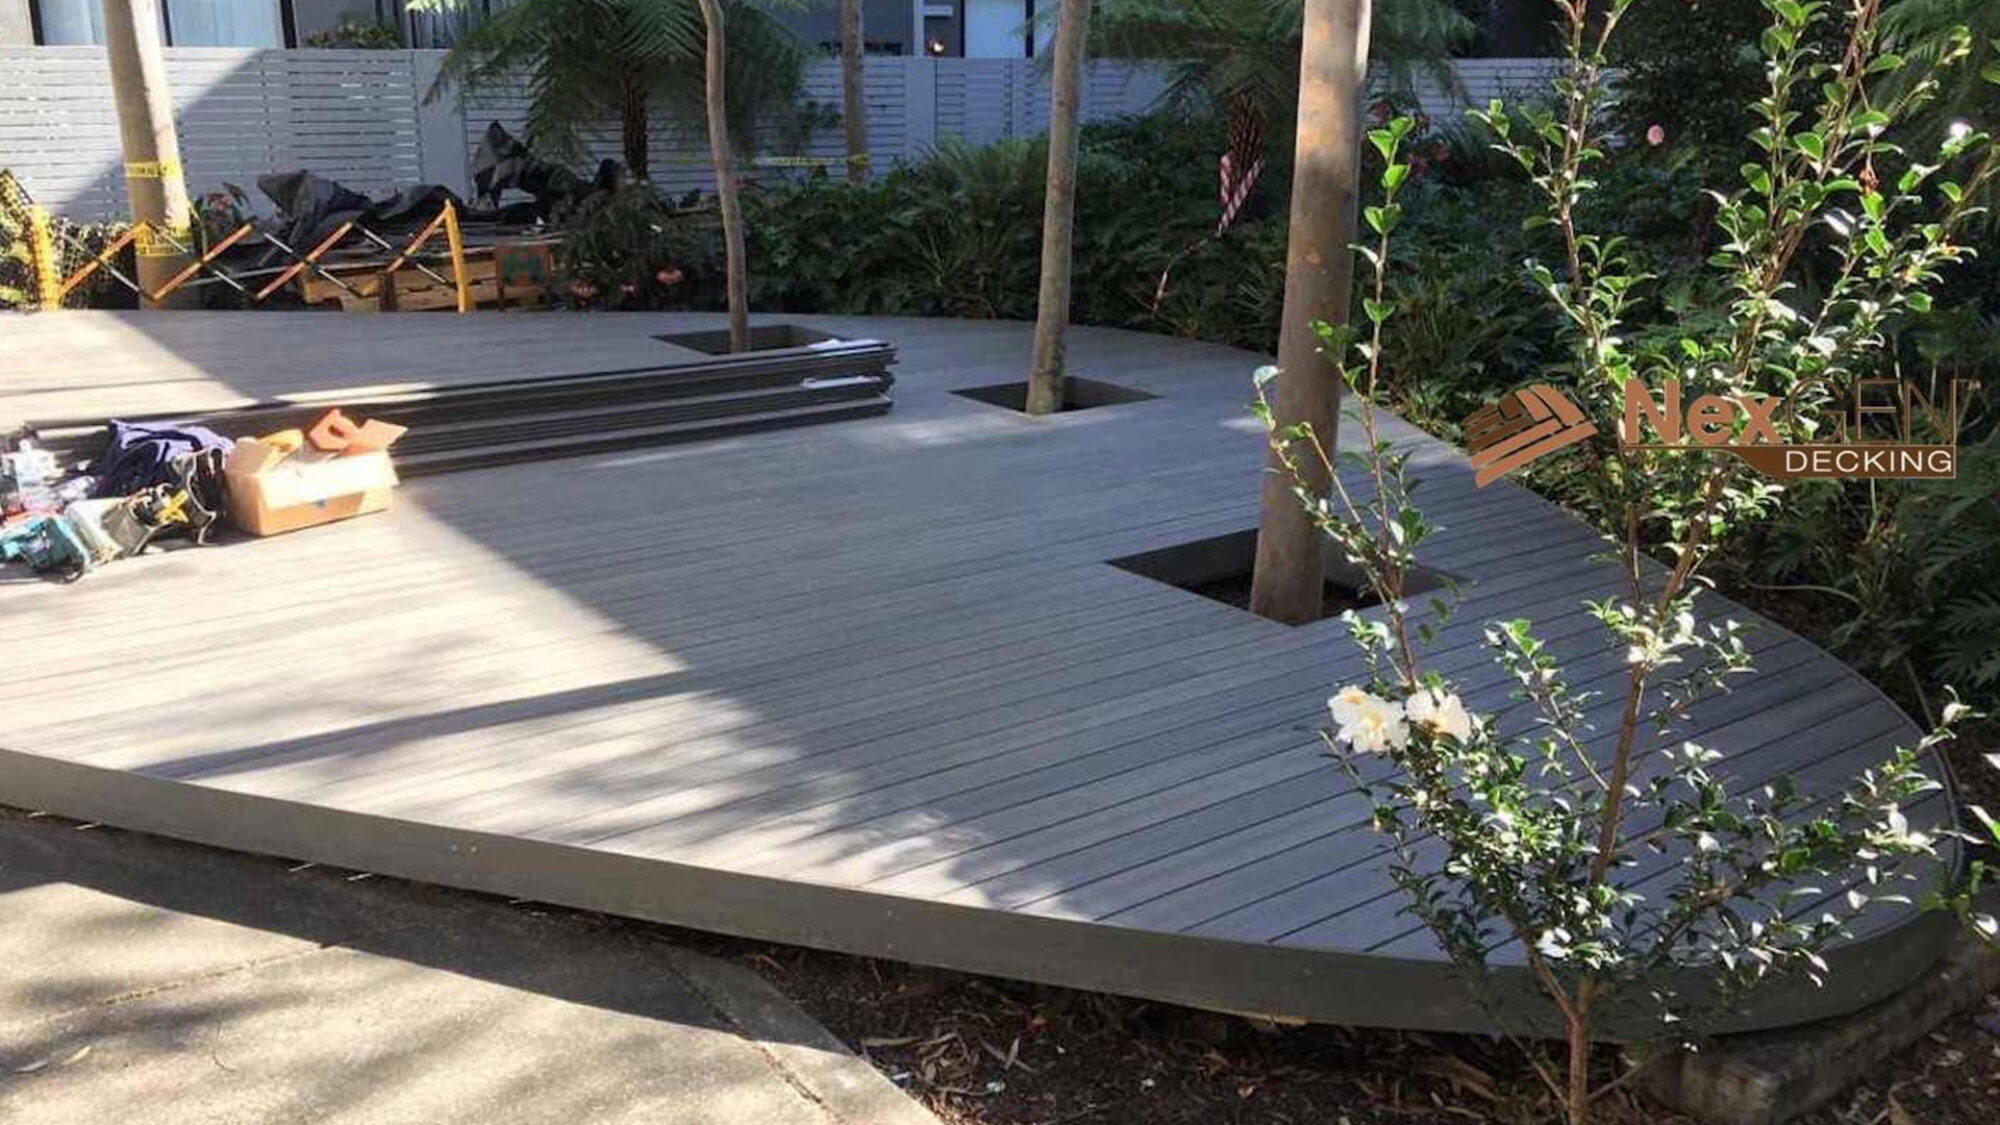 What Is a Floating Deck and Can I Build One?